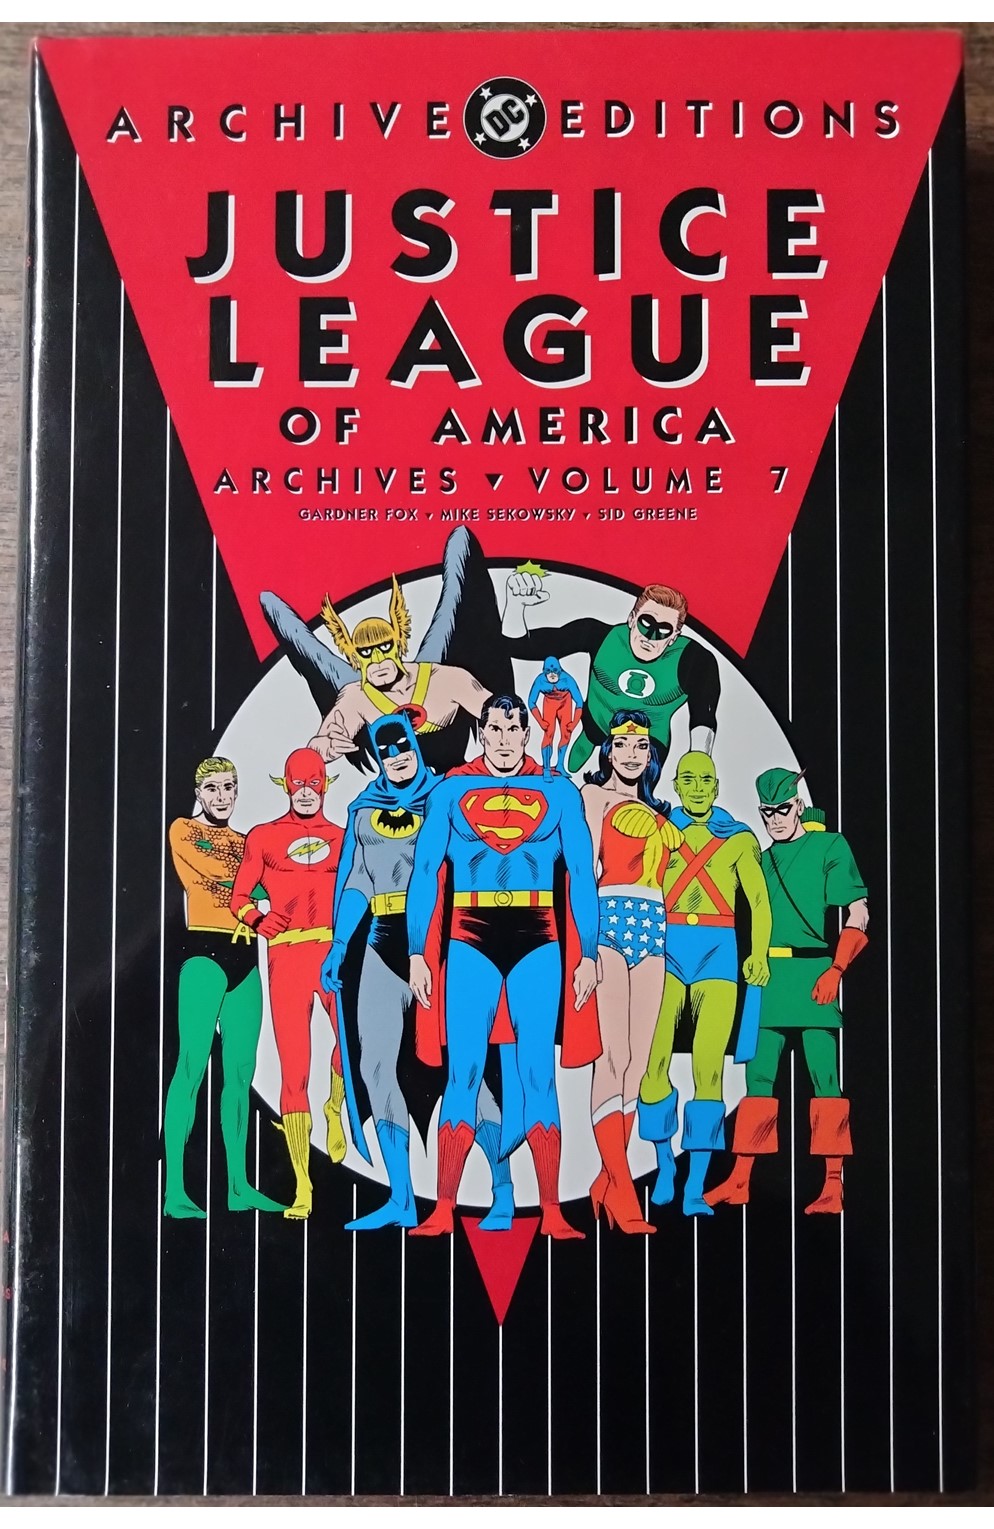 Justice League of America Archives Volume 7 Hardcover (DC 2009) Used - Very Good